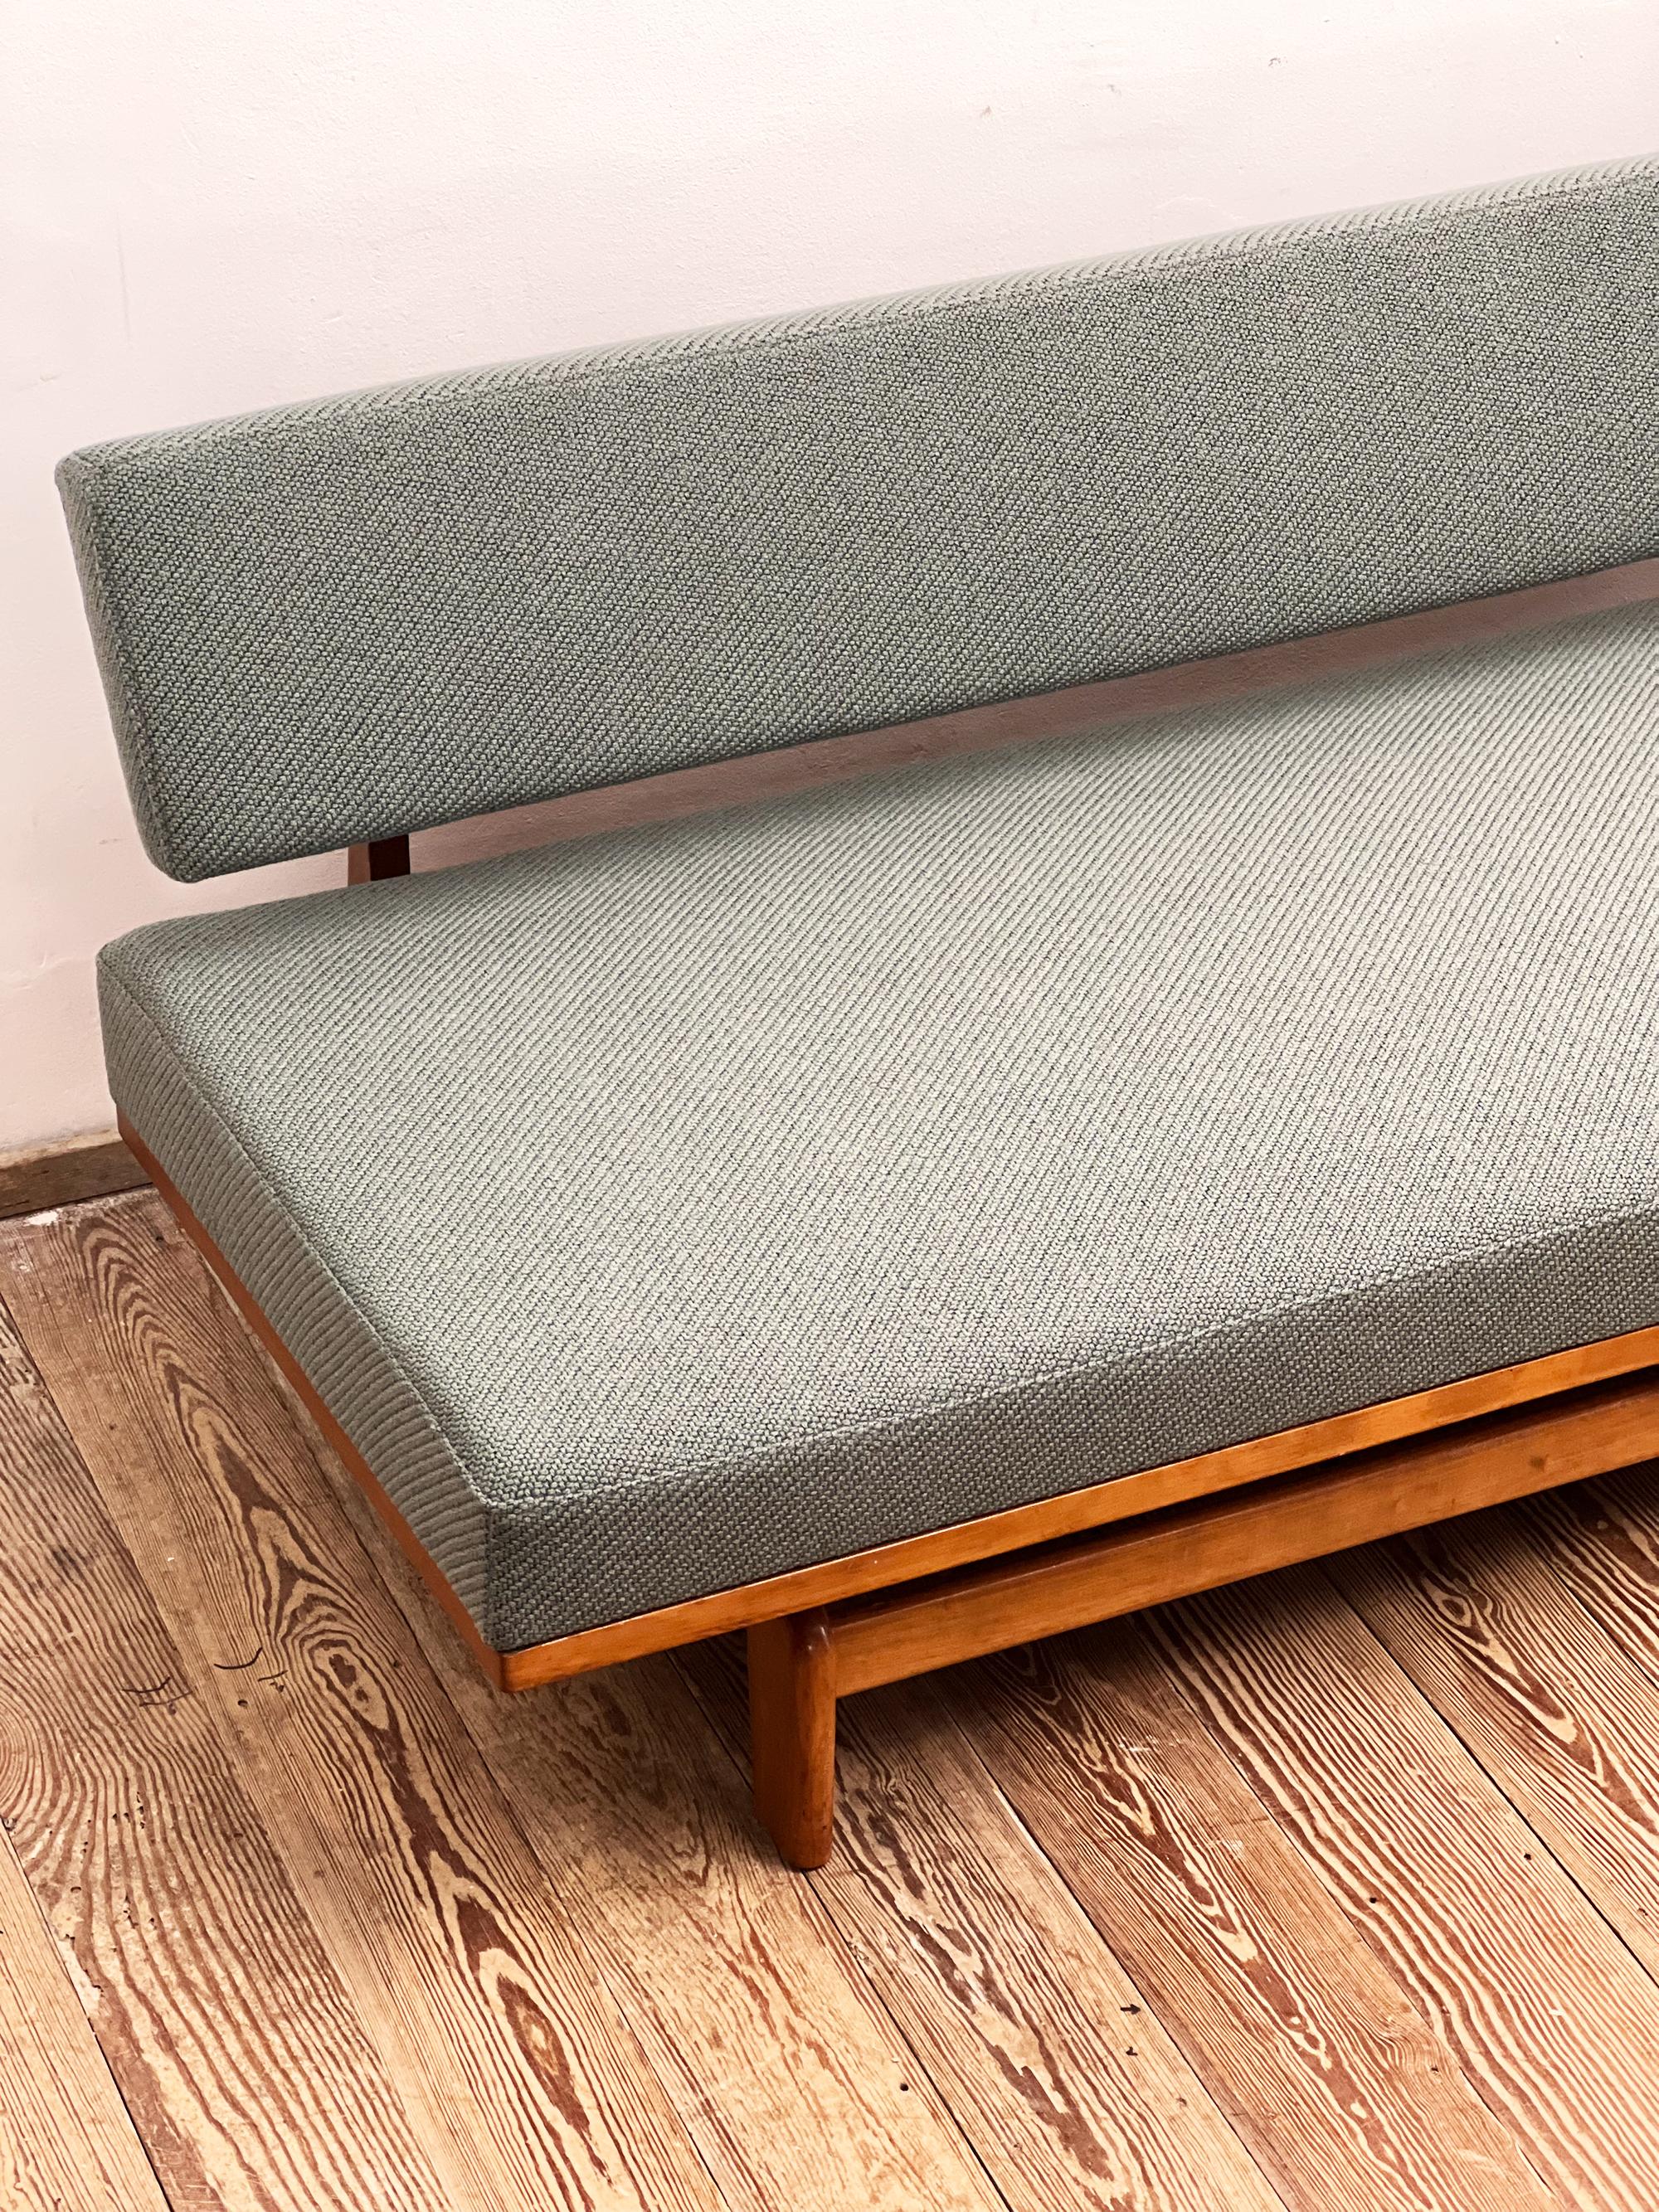 Mid-Century 3 Seat Sofa by Hans Bellmann for Wilkhahn, Germany, 1950s For Sale 12